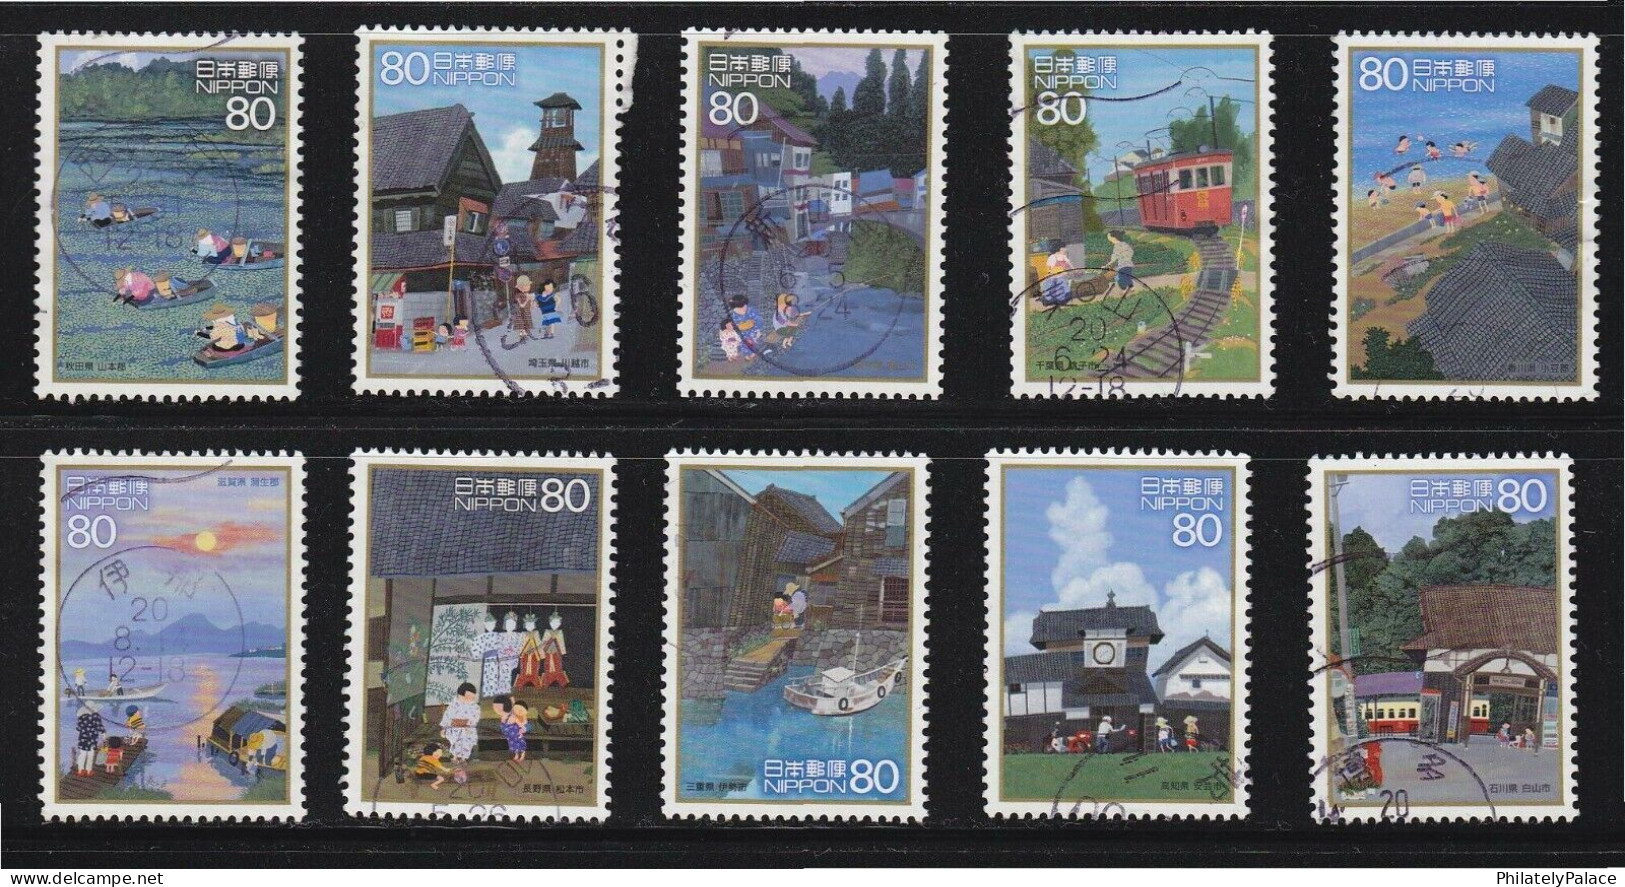 JAPAN 2008 (PREFECTURE) HOMETOWNS SCENES IN MY HEART (AUTUMN) S2, 10 STAMPS USED (**) - Oblitérés